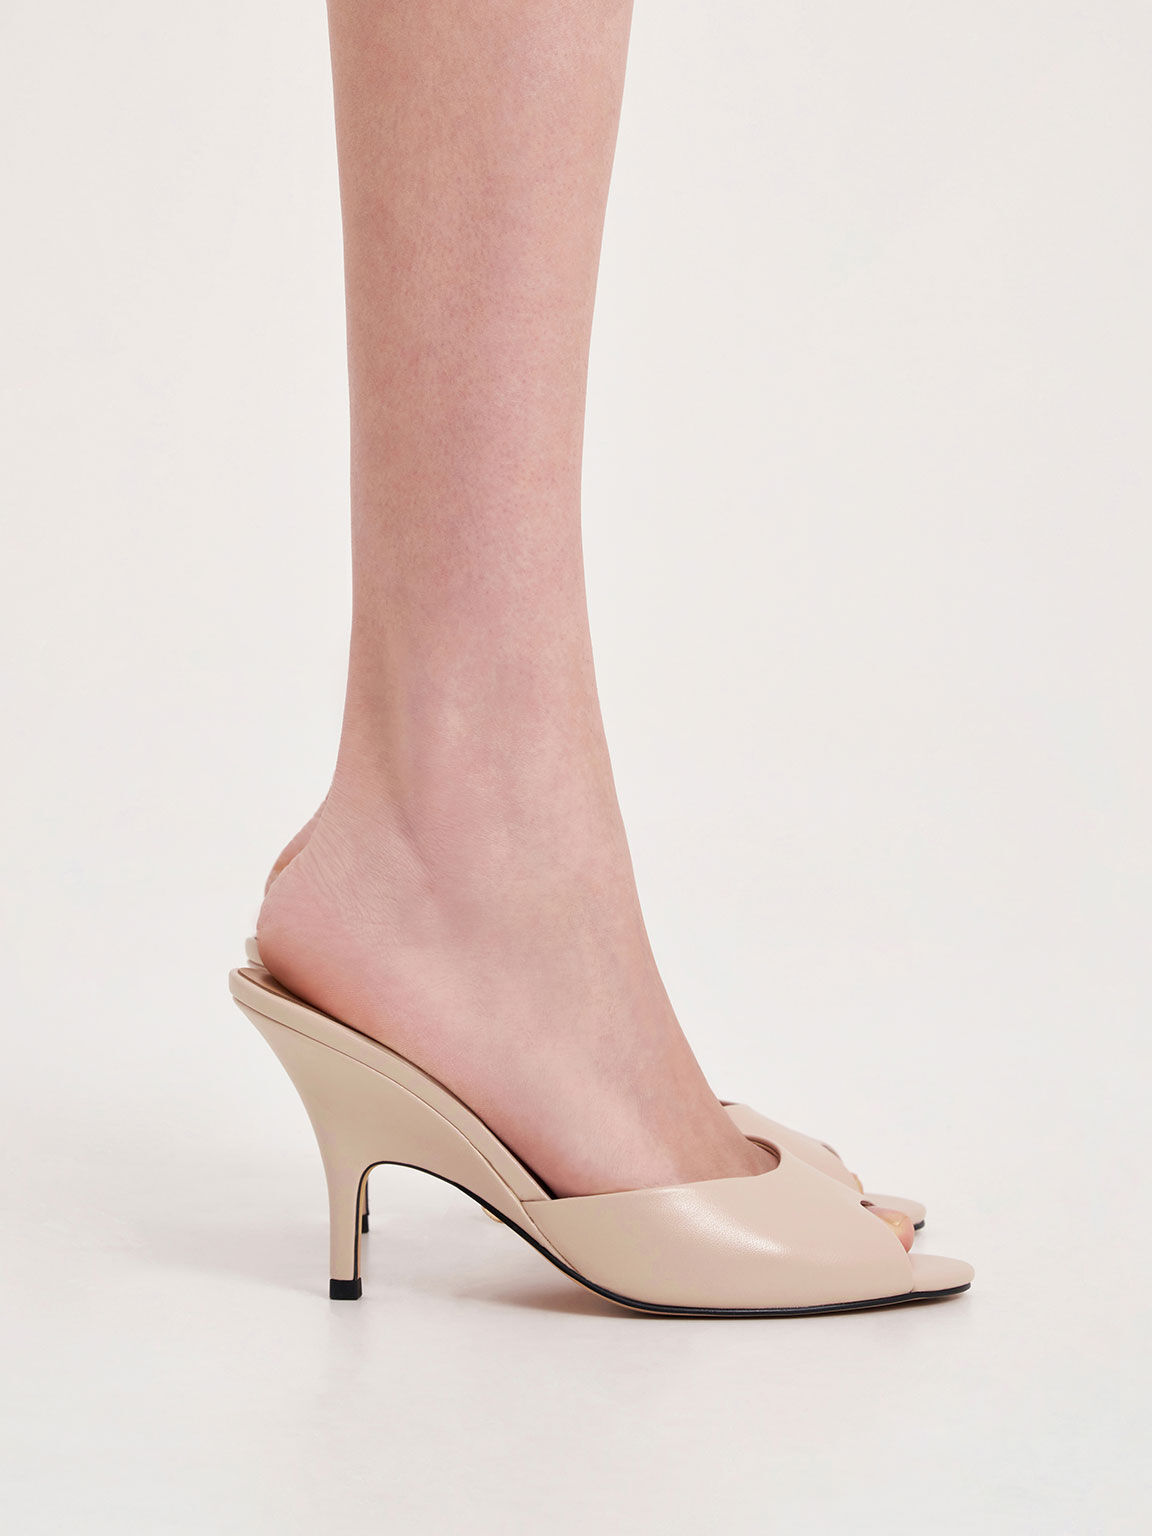 Leather Round-Toe Heeled Mules, Nude, hi-res